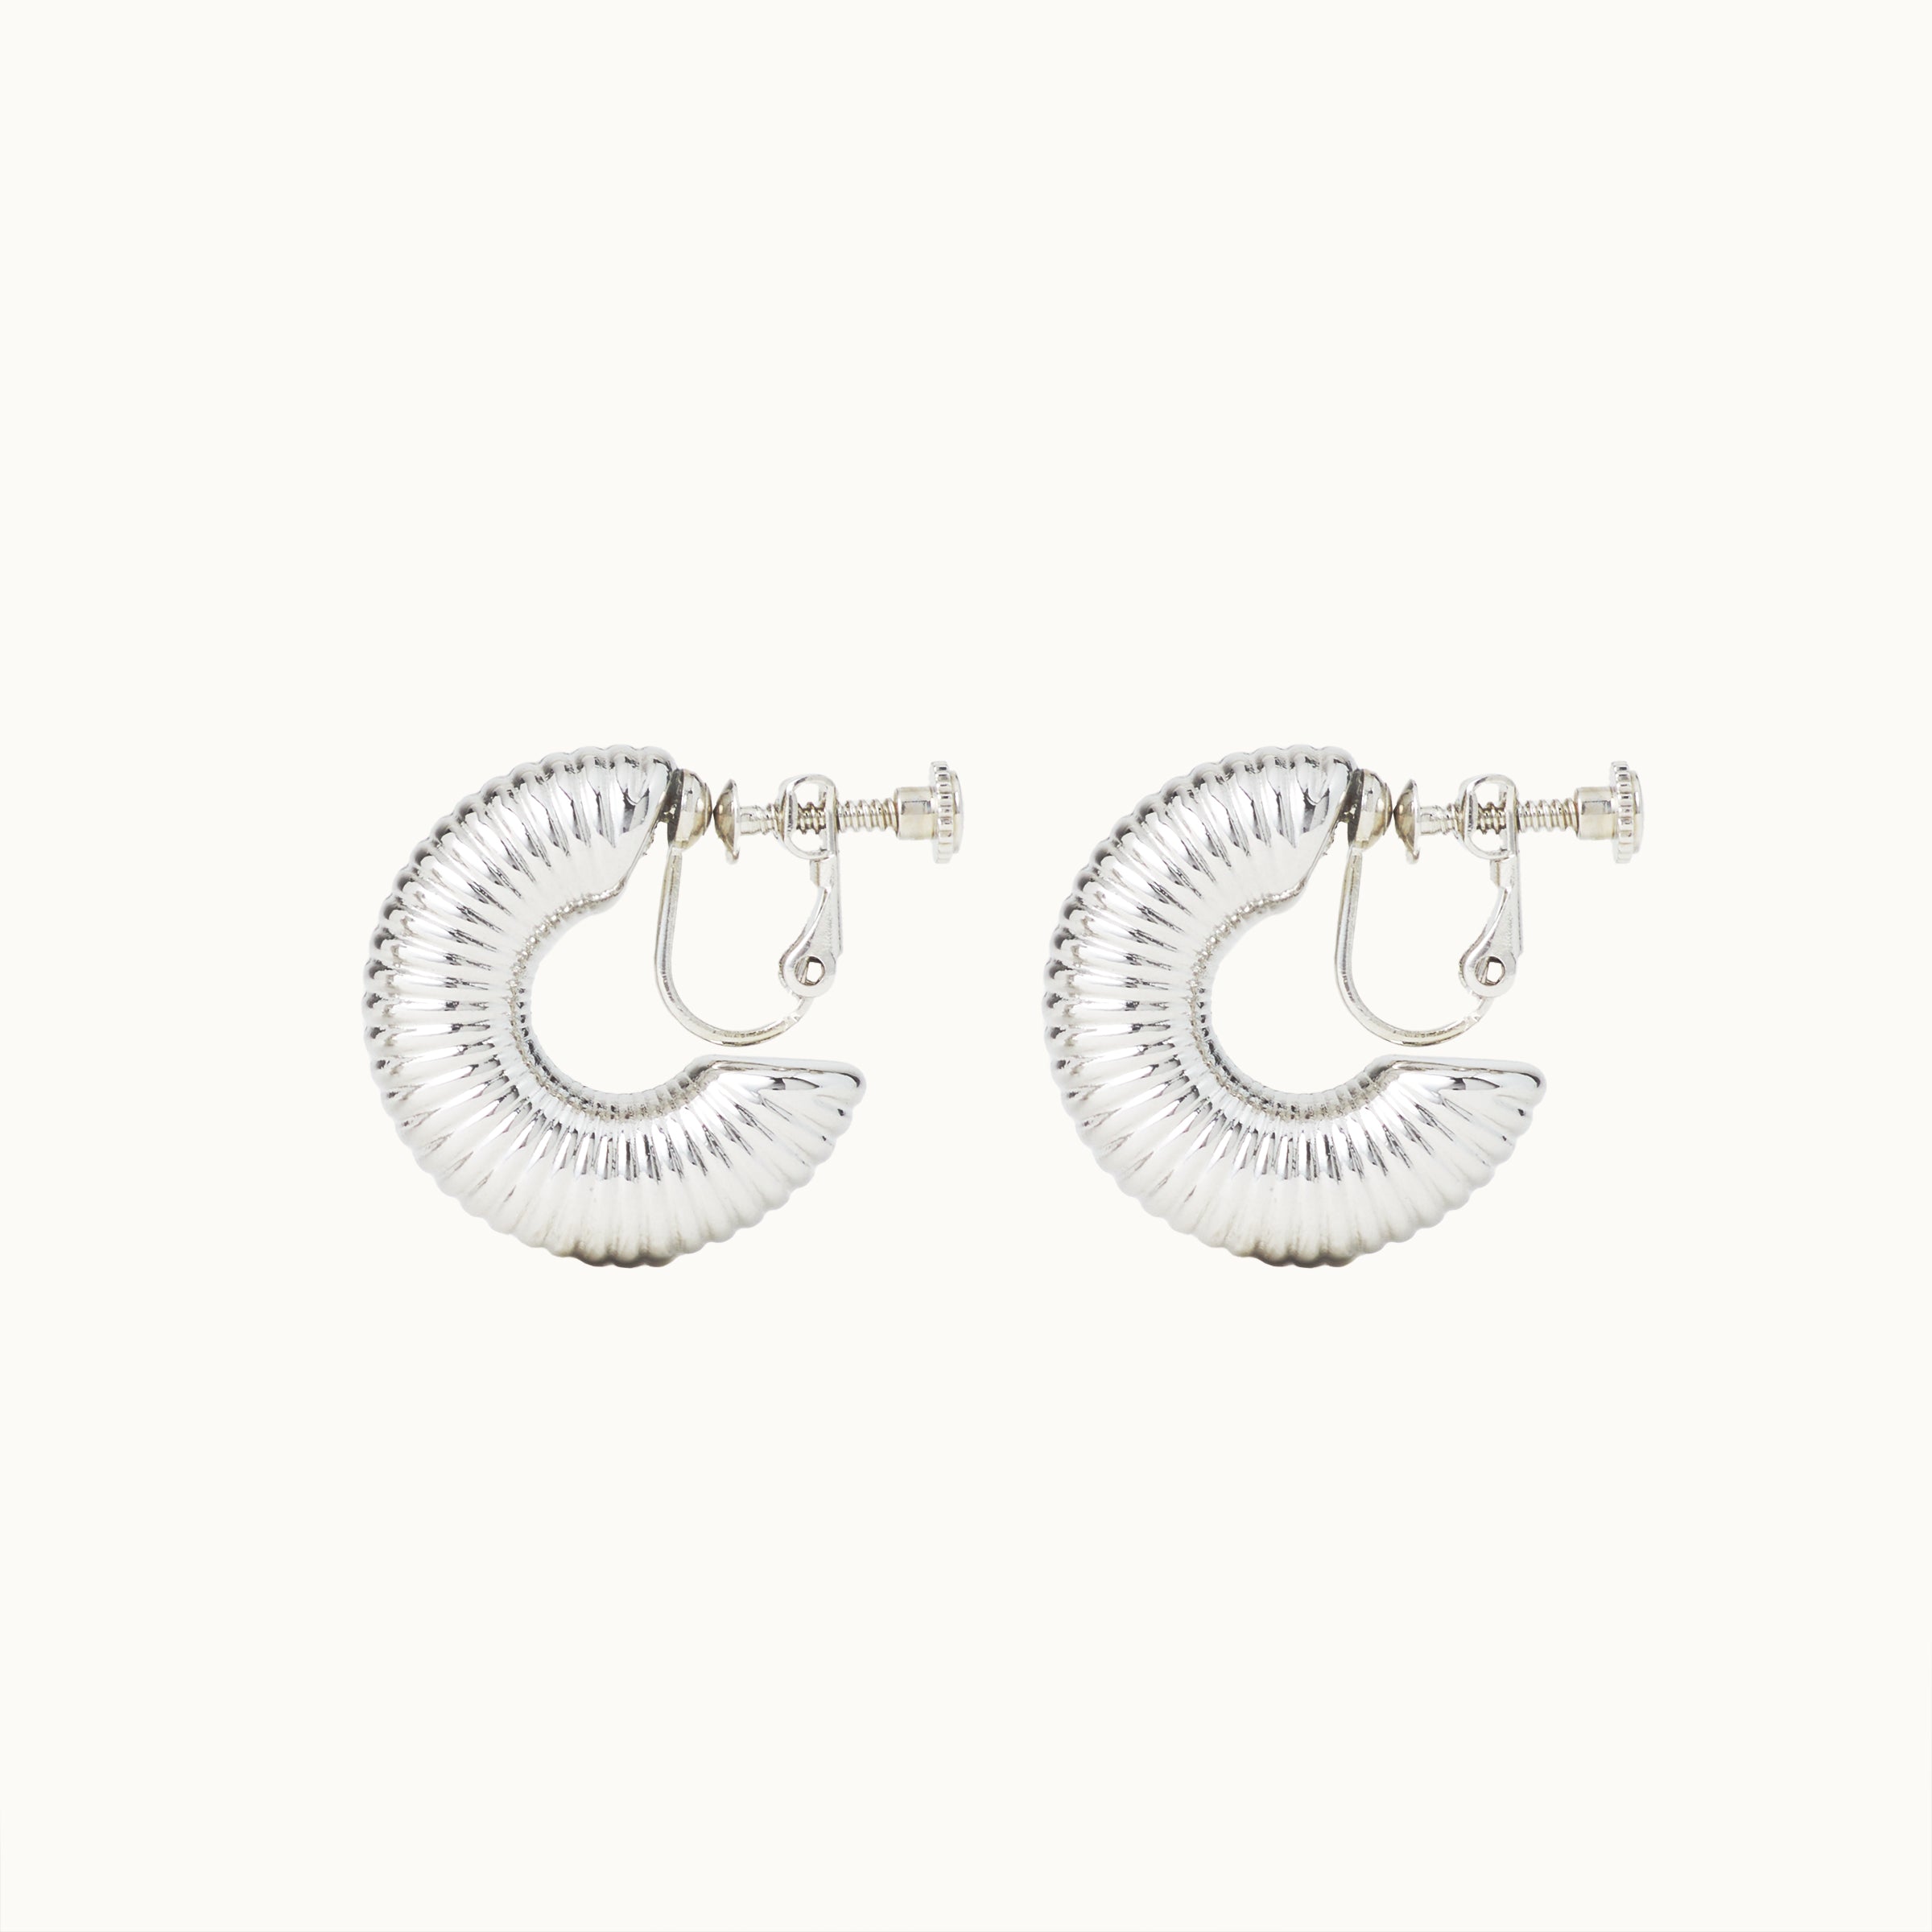 Image of the Bold Ribbed Hoop Clip On Earrings in Silver. Our screwback closure and manual adjustment capabilities cater to a wide range of needs, including thick, sensitive, small, and keloid-prone ears. Easily wear them for 8-12 hours for all-day fashion. Sold in pairs.